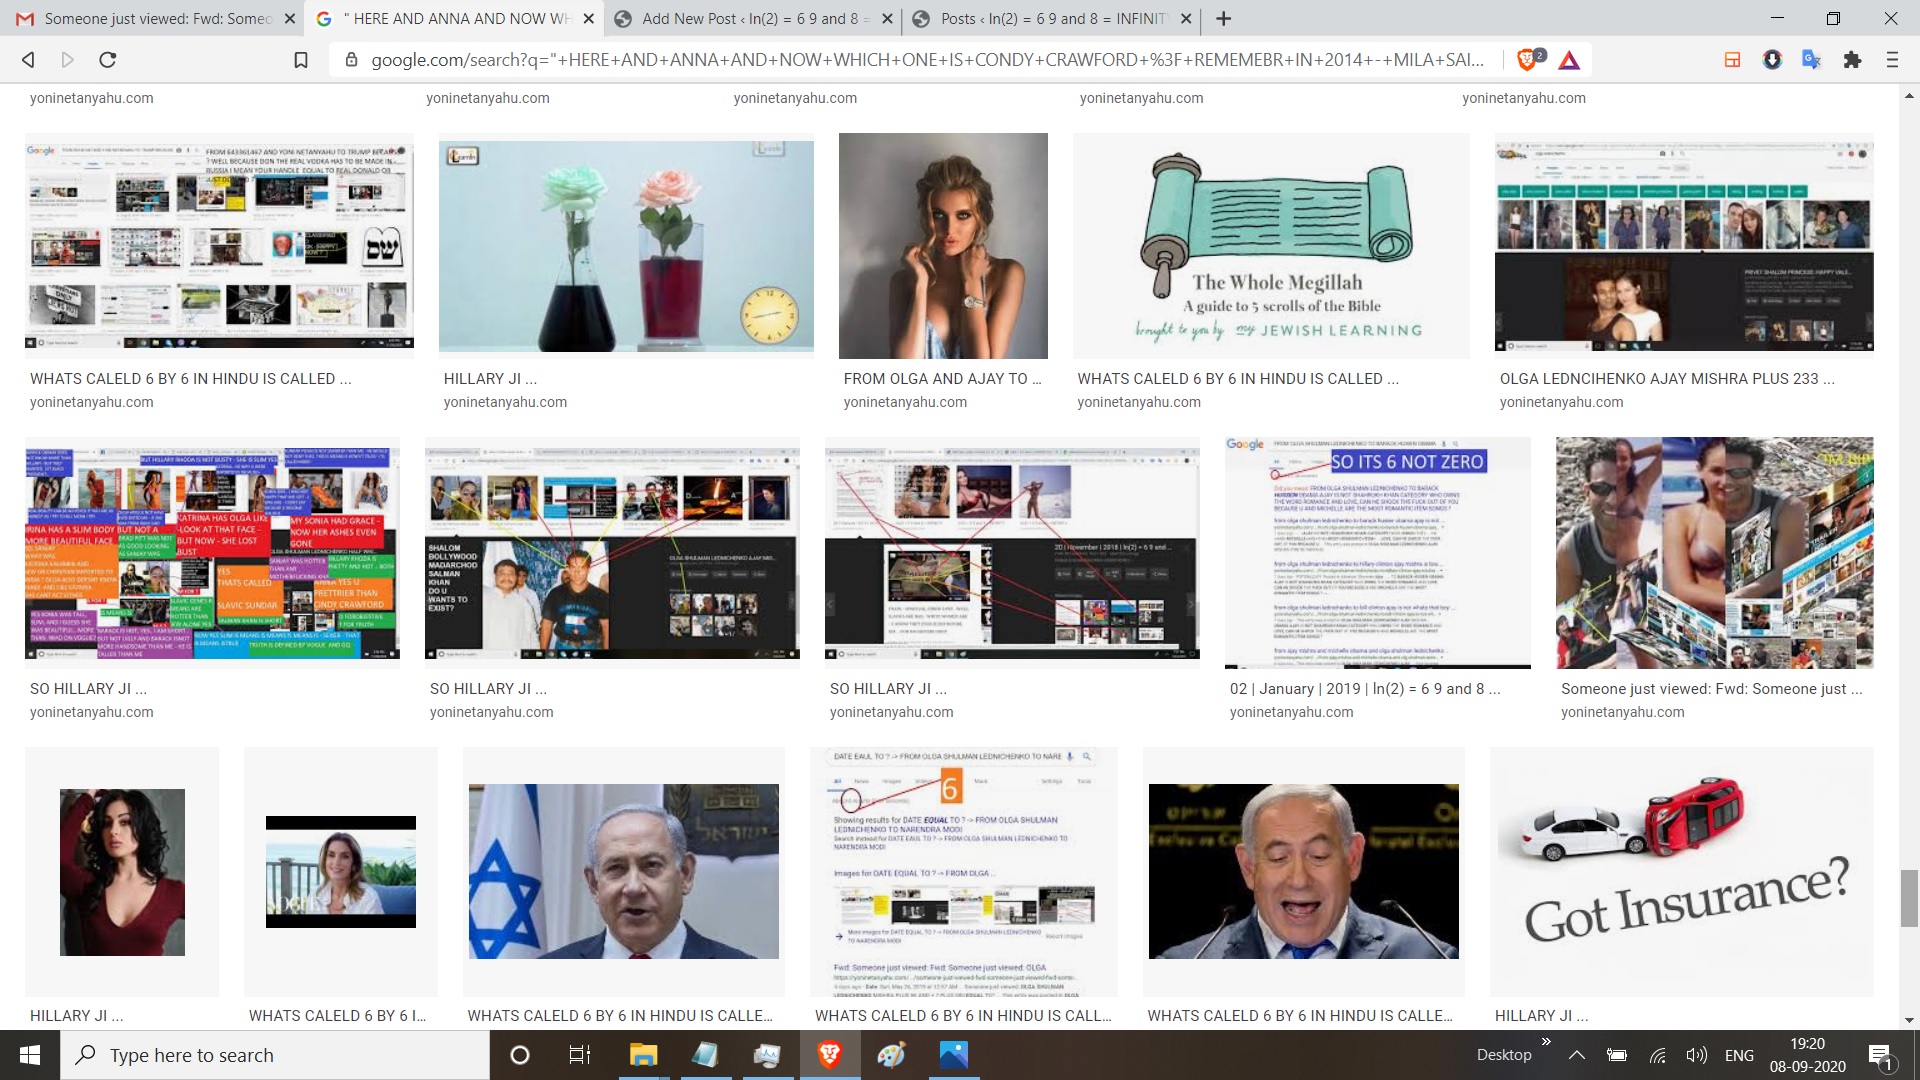  " HERE AND ANNA AND NOW WHICH ONE IS CONDY CRAWFORD ? REMEMEBR IN 2014 - MILA SAID ON THE BLOG SOMETHING ? - IS BILL CLINTON AND BARACK OBAMA THERE -> THE LIP JOB AND THE CINDY CRAWFORD -? WITH LOVE FROM RUSSIA AND INDIA - ... GOT IT ? - YOUR WECPOOME Inbox x YONI NETANYAHU x Streak 11:25 AM (3 hours ago) to me Someone just viewed your email with the subject: HERE AND ANNA AND NOW WHICH ONE IS CONDY CRAWFORD ? REMEMEBR IN 2014 - MILA SAID ON THE BLOG SOMETHING ? - IS BILL CLINTON AND BARACK OBAMA THERE -> THE LIP JOB AND THE CINDY CRAWFORD -? WITH LOVE FROM RUSSIA AND INDIA - ... GOT IT ? - YOUR WECPOOME Details People on thread: YONI NETANYAHU OLGA BLOG POST BY EMAIL Device: PC Location: houston, tx Streak 2:57 PM (1 minute ago) to me Someone just viewed your email with the subject: HERE AND ANNA AND NOW WHICH ONE IS CONDY CRAWFORD ? REMEMEBR IN 2014 - MILA SAID ON THE BLOG SOMETHING ? - IS BIL L CLINTON AND BA"